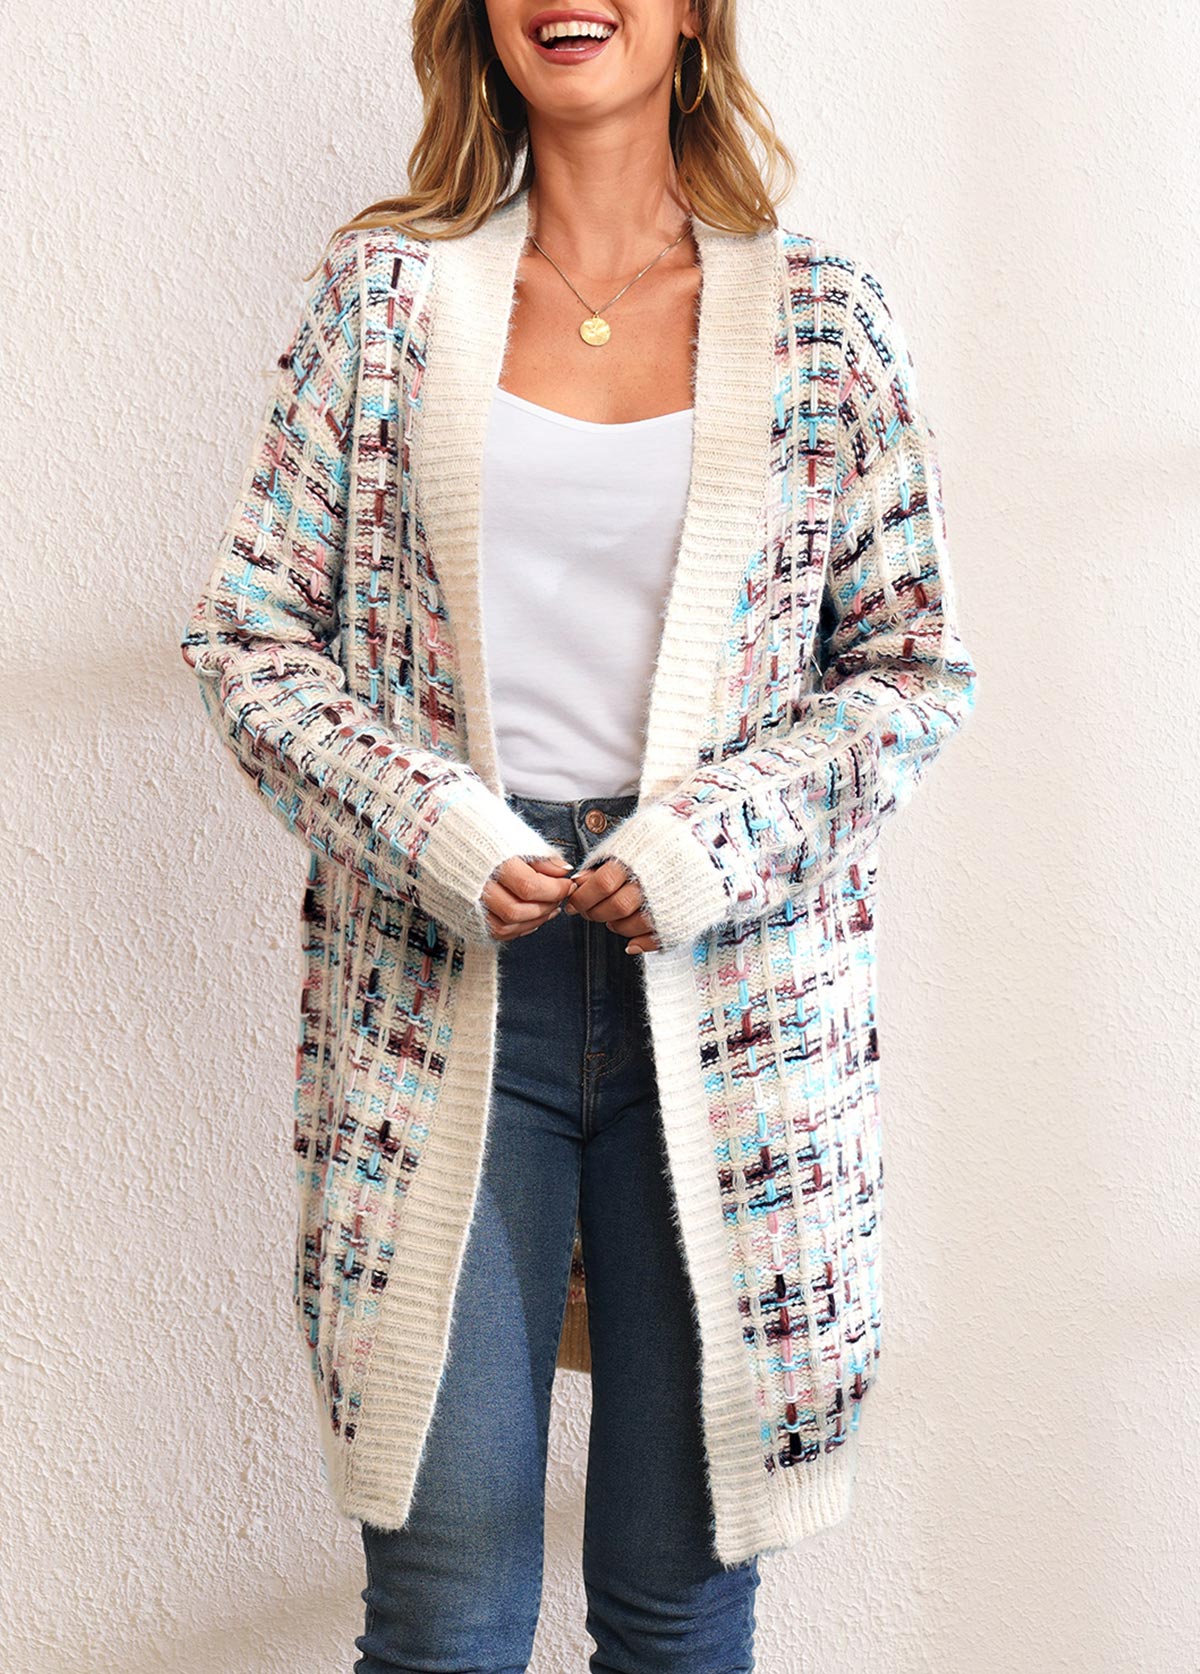 Long Sleeve Open Front Colorful Cardigan